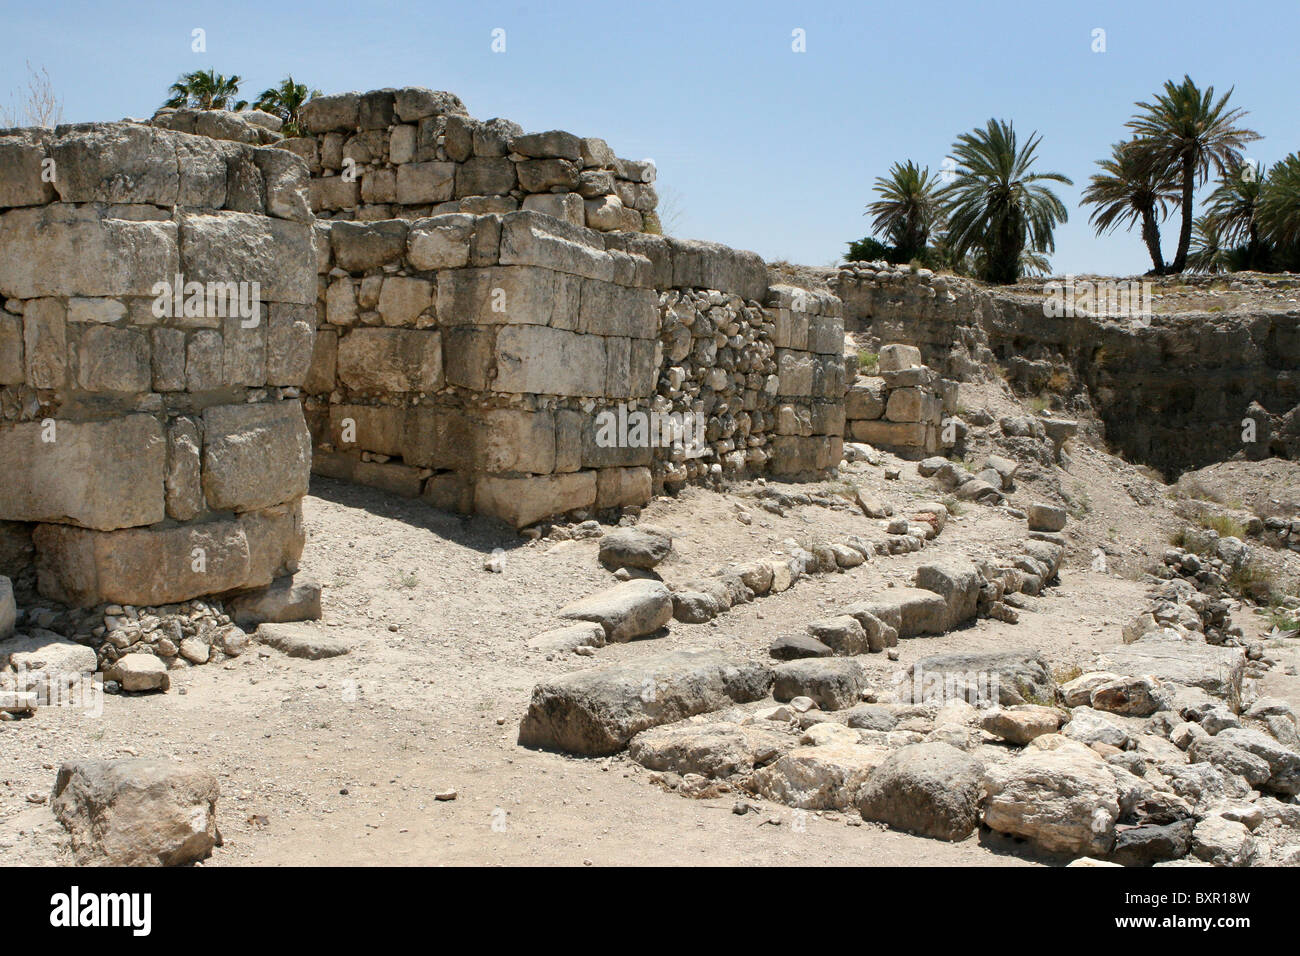 Excavations at the site of the ancient city of Tel Megiddo which overlooks the Valley of Armageddon, Israel. Stock Photo